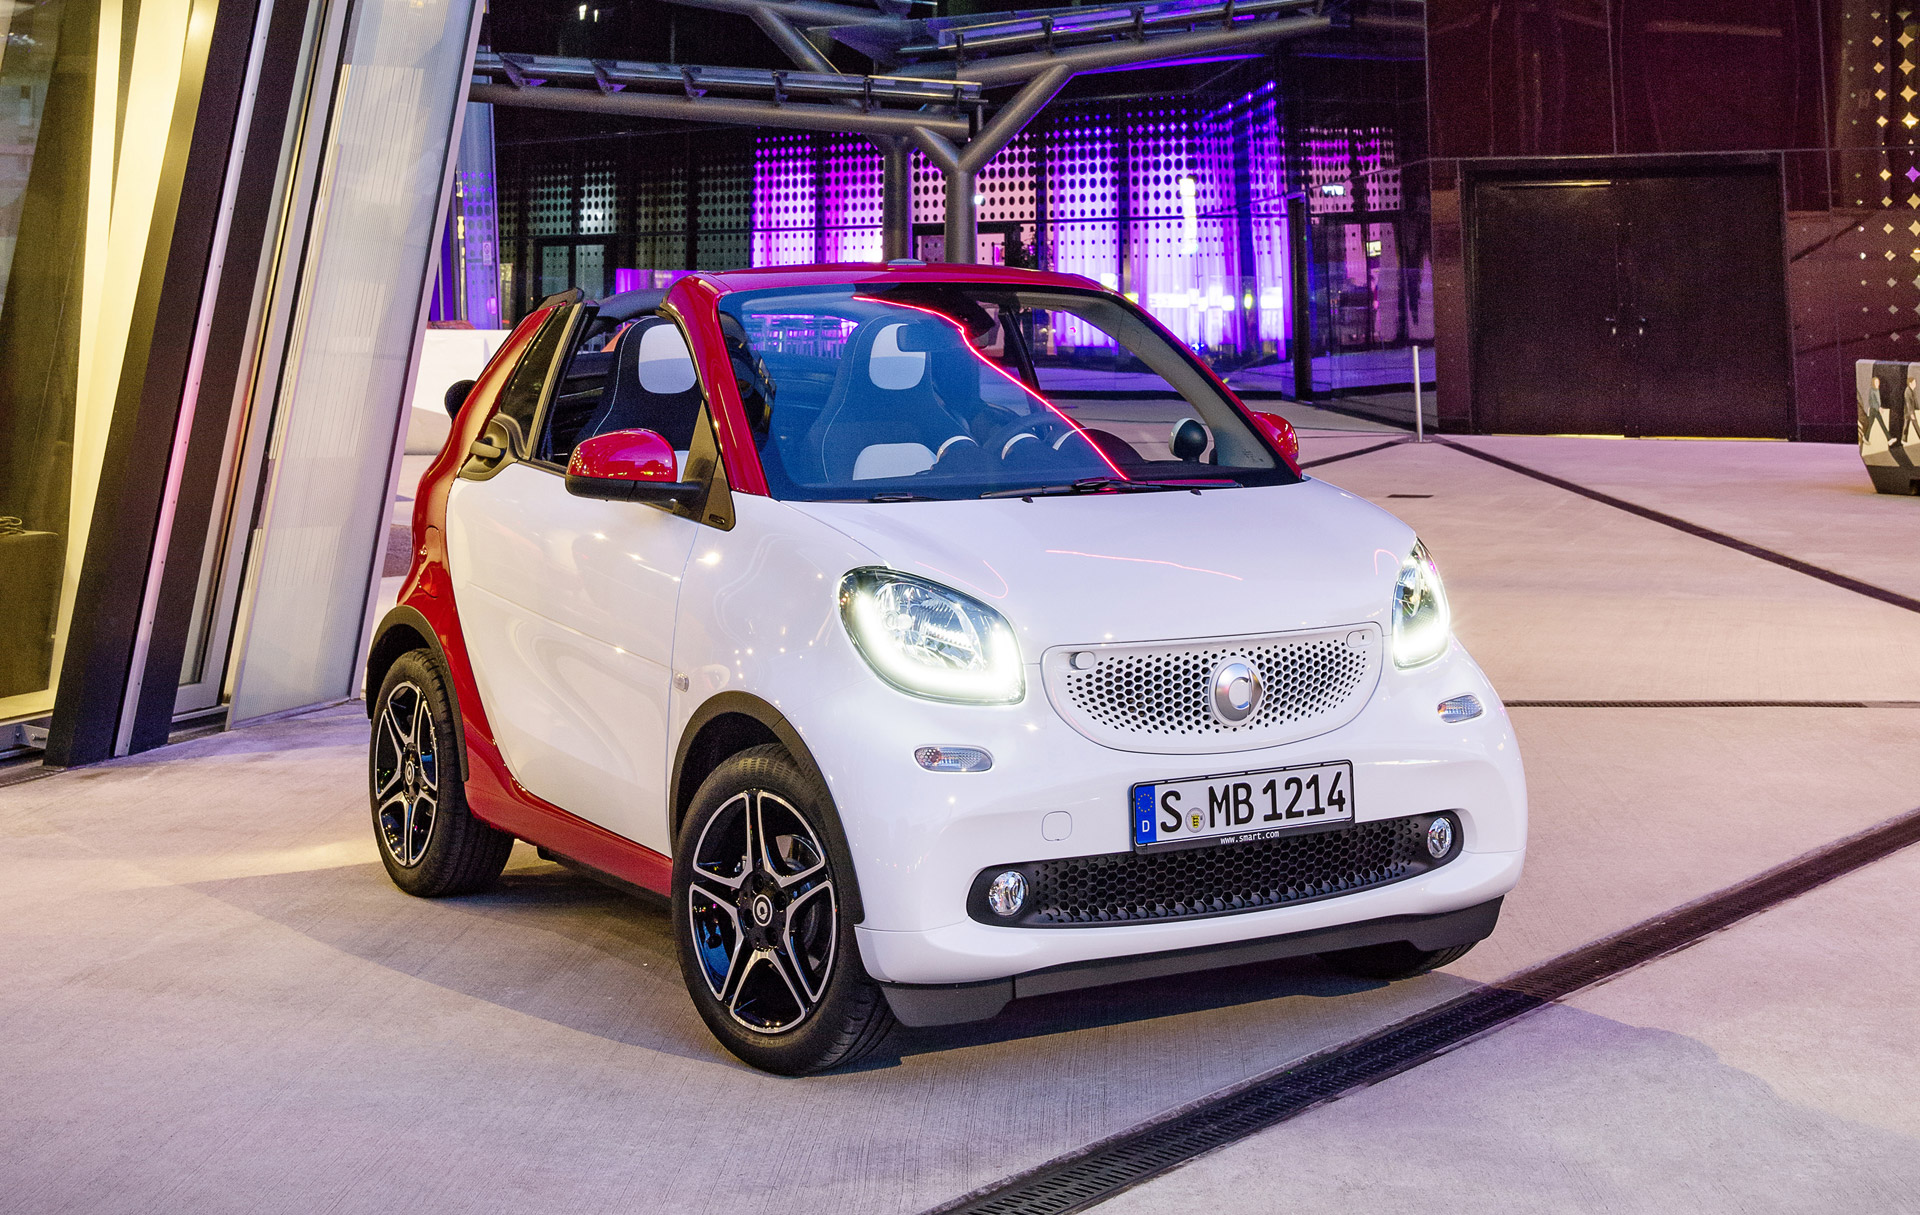 2017 Smart ForTwo Cabrio prices start at under $20,000